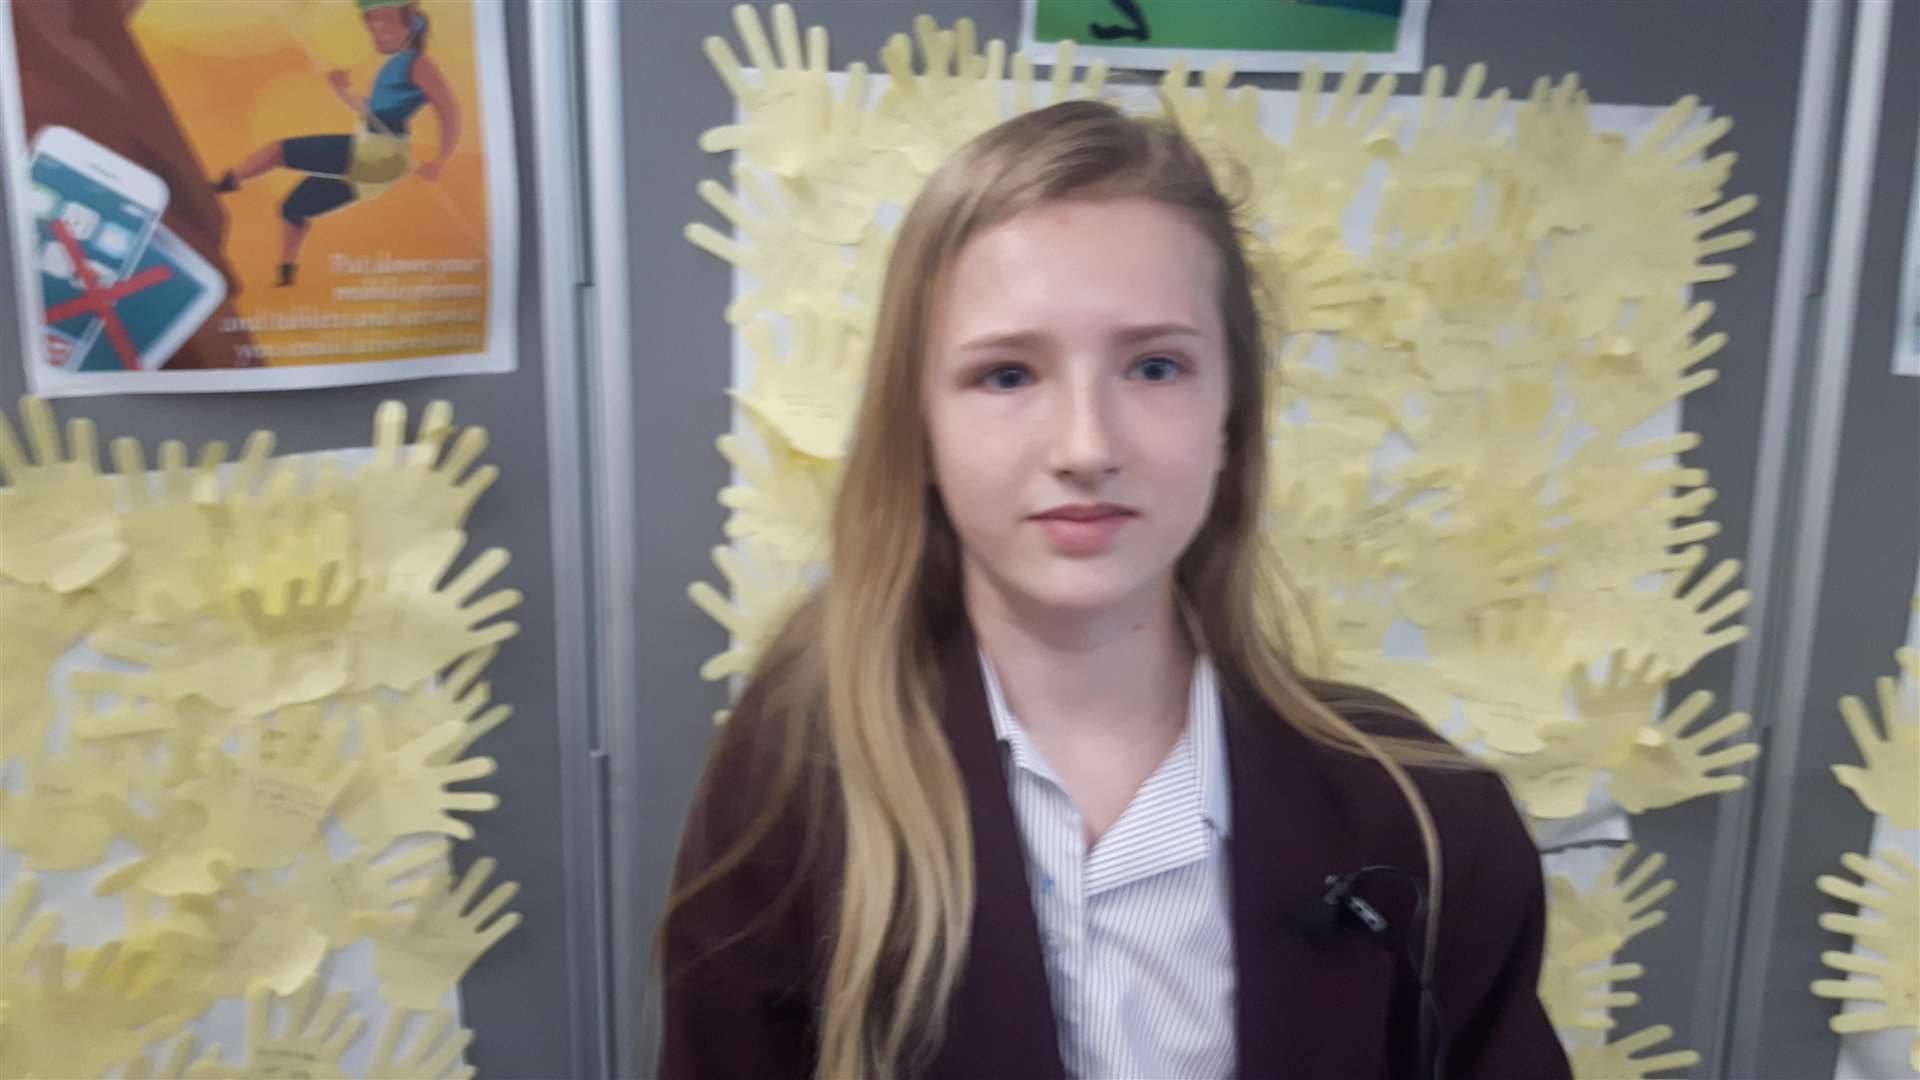 Invicta student Lucy: "It was difficult at first, but got easier."